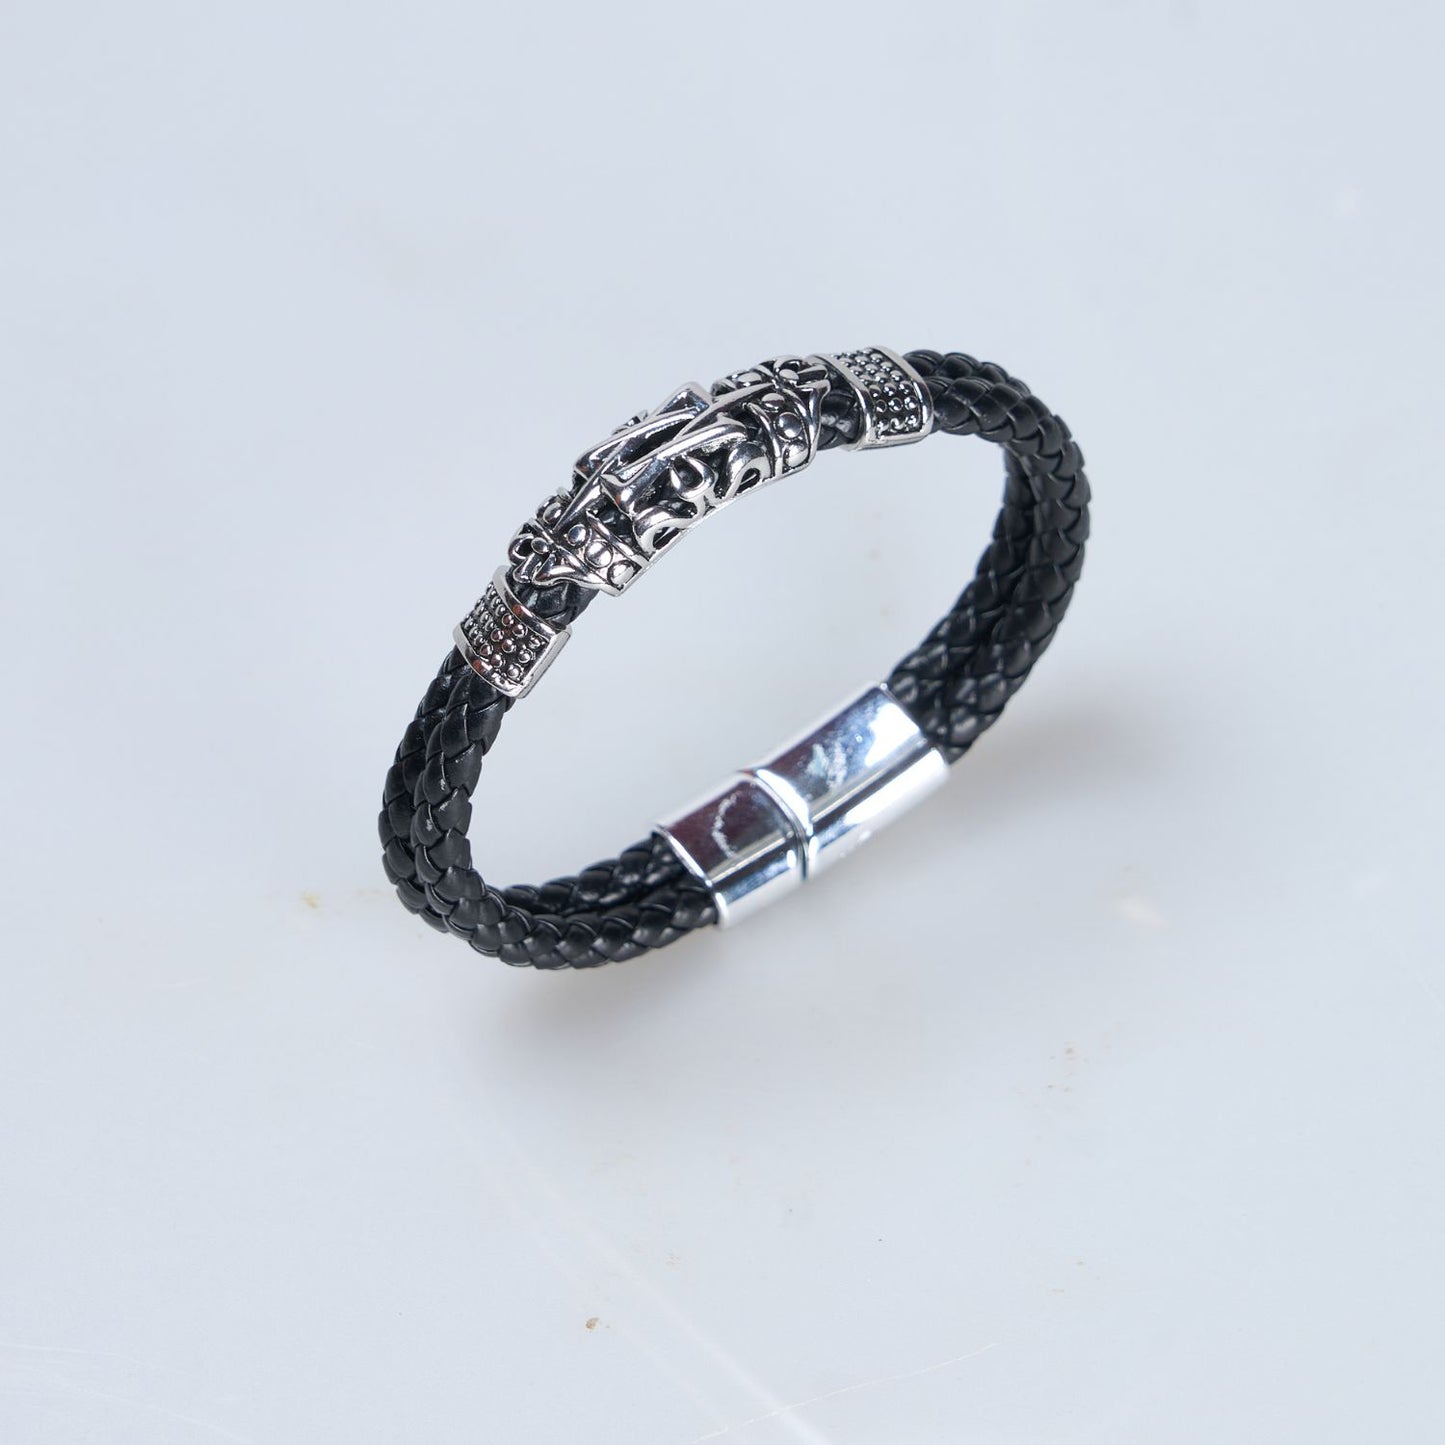 Front view of Black and Silver colored Bracelet for men with magnetic clasp